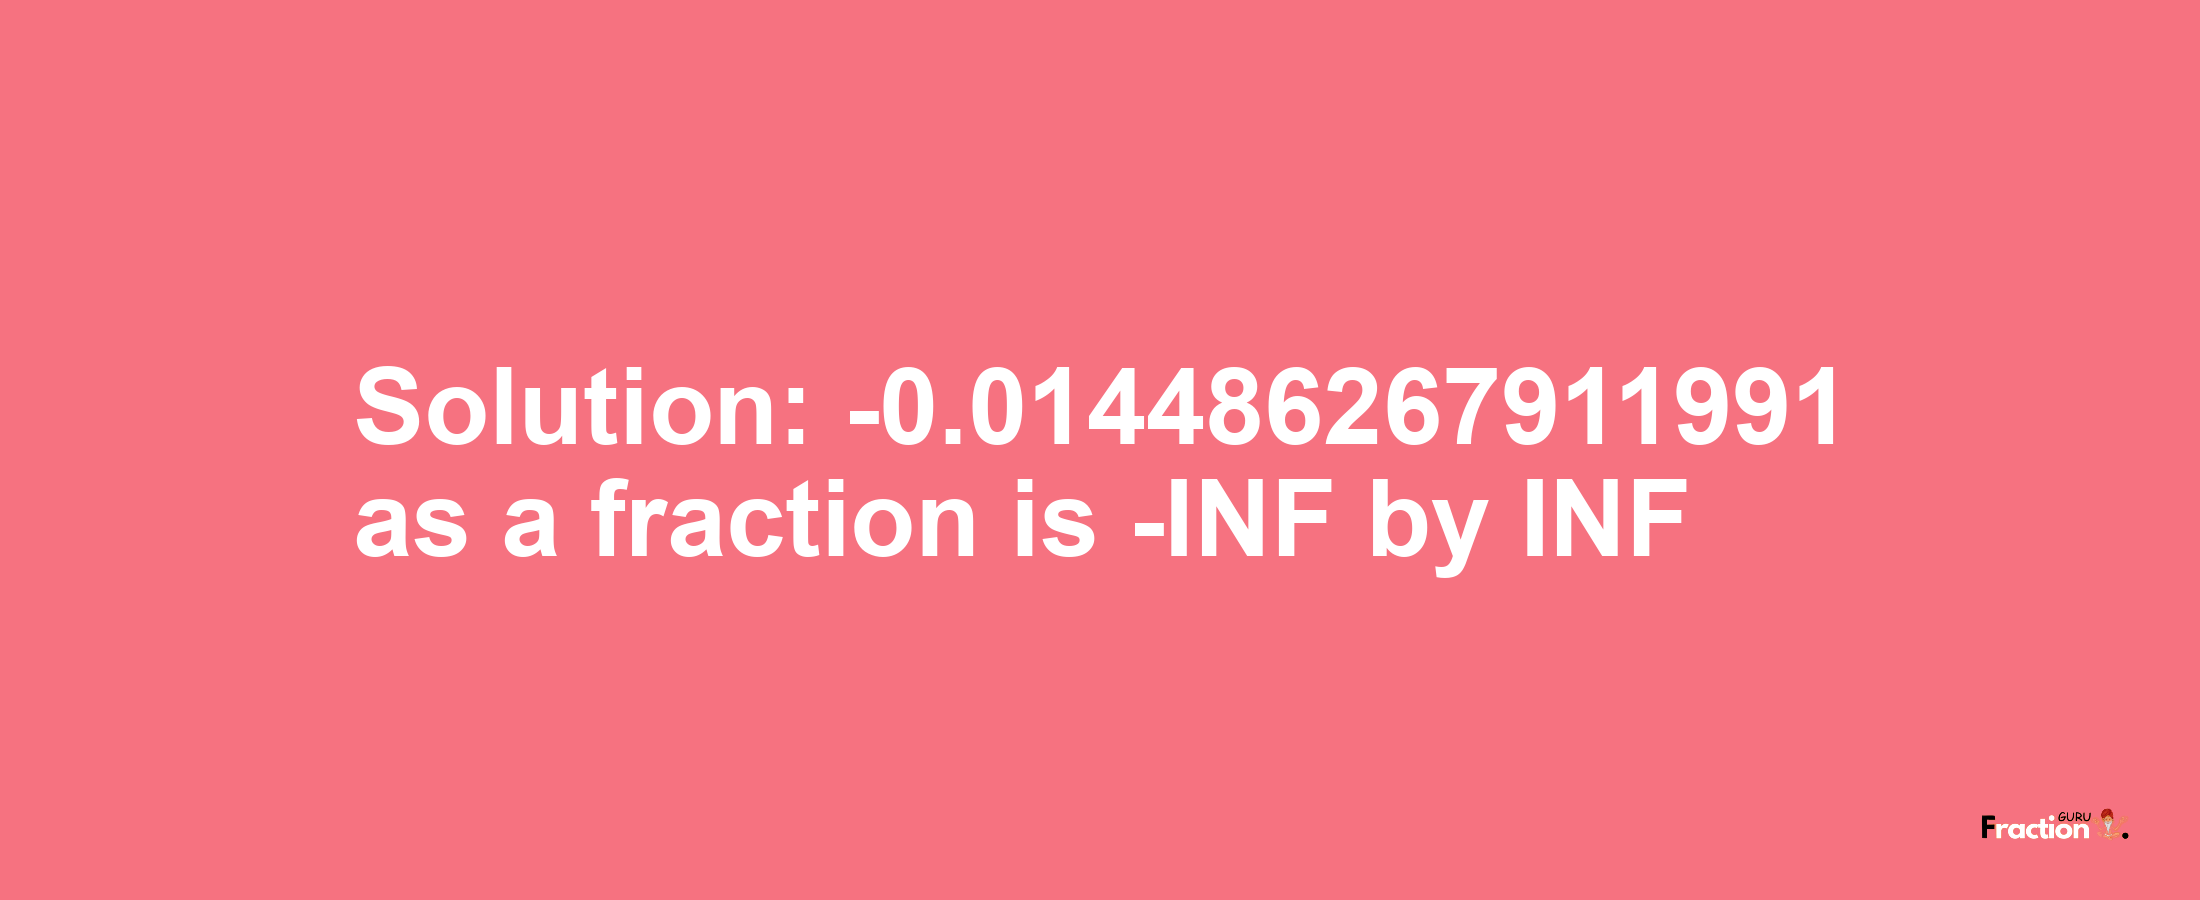 Solution:-0.014486267911991 as a fraction is -INF/INF